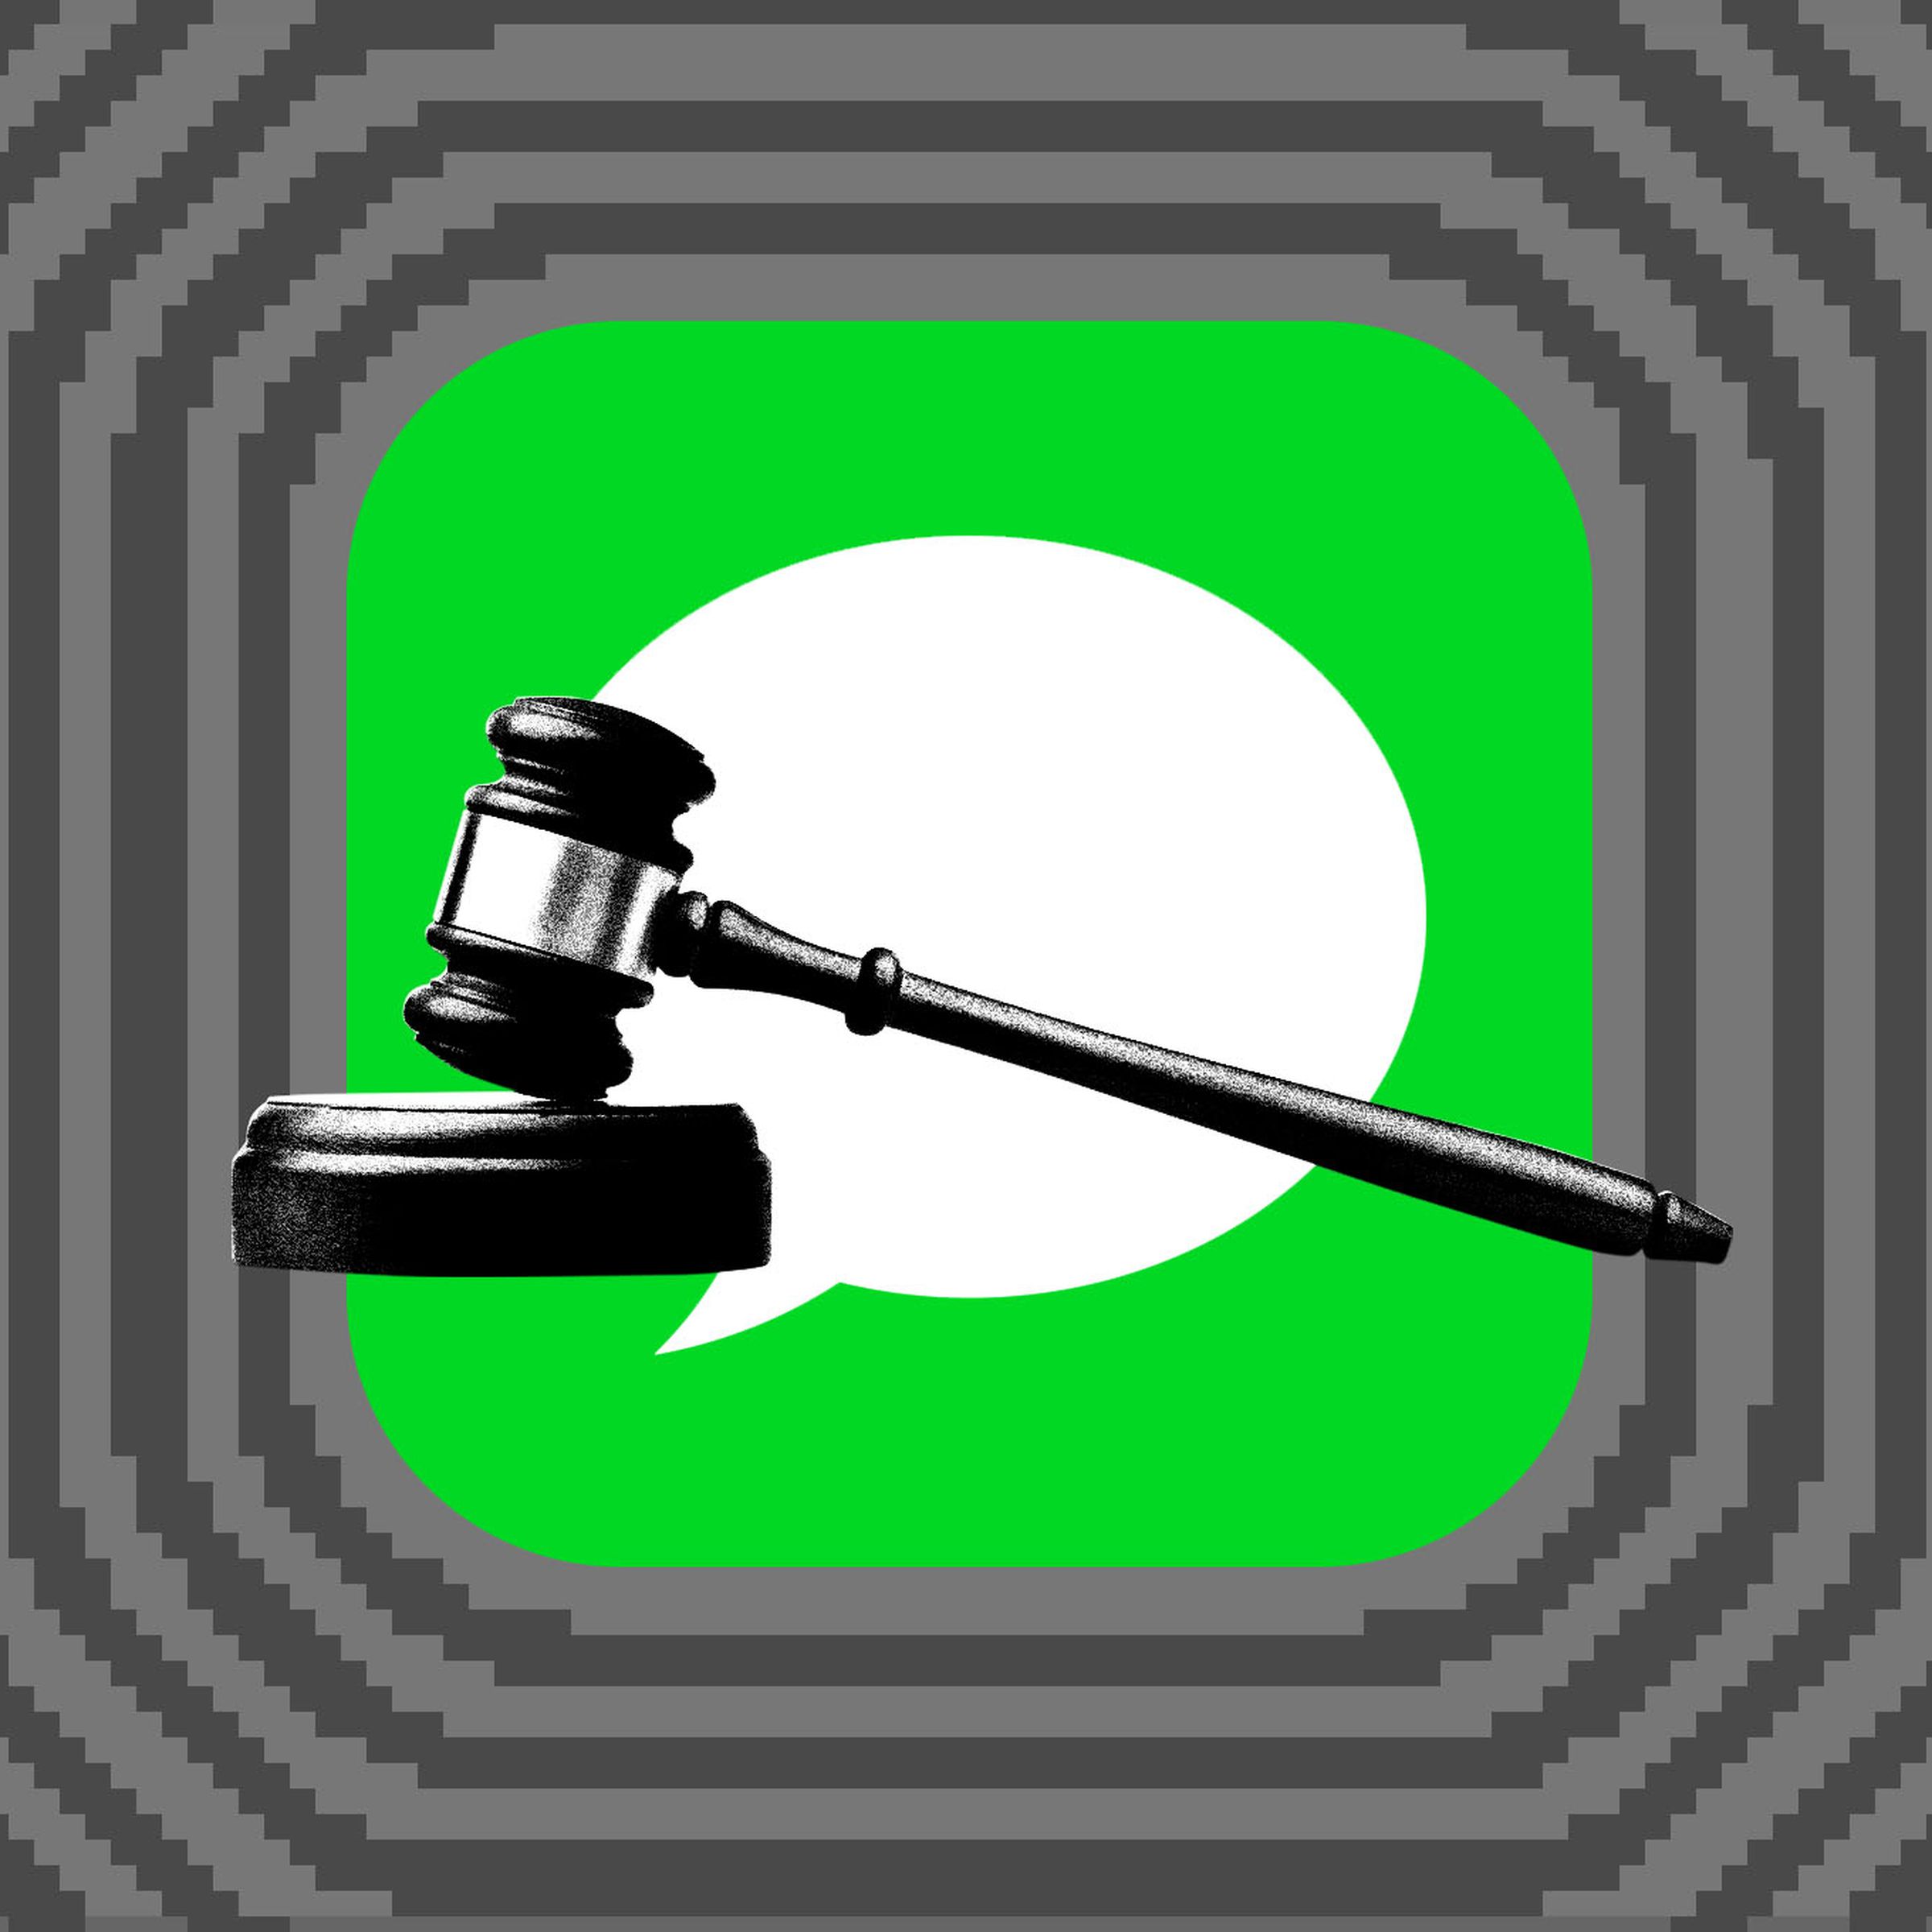 Illustration of the iMessage behind a gavel.